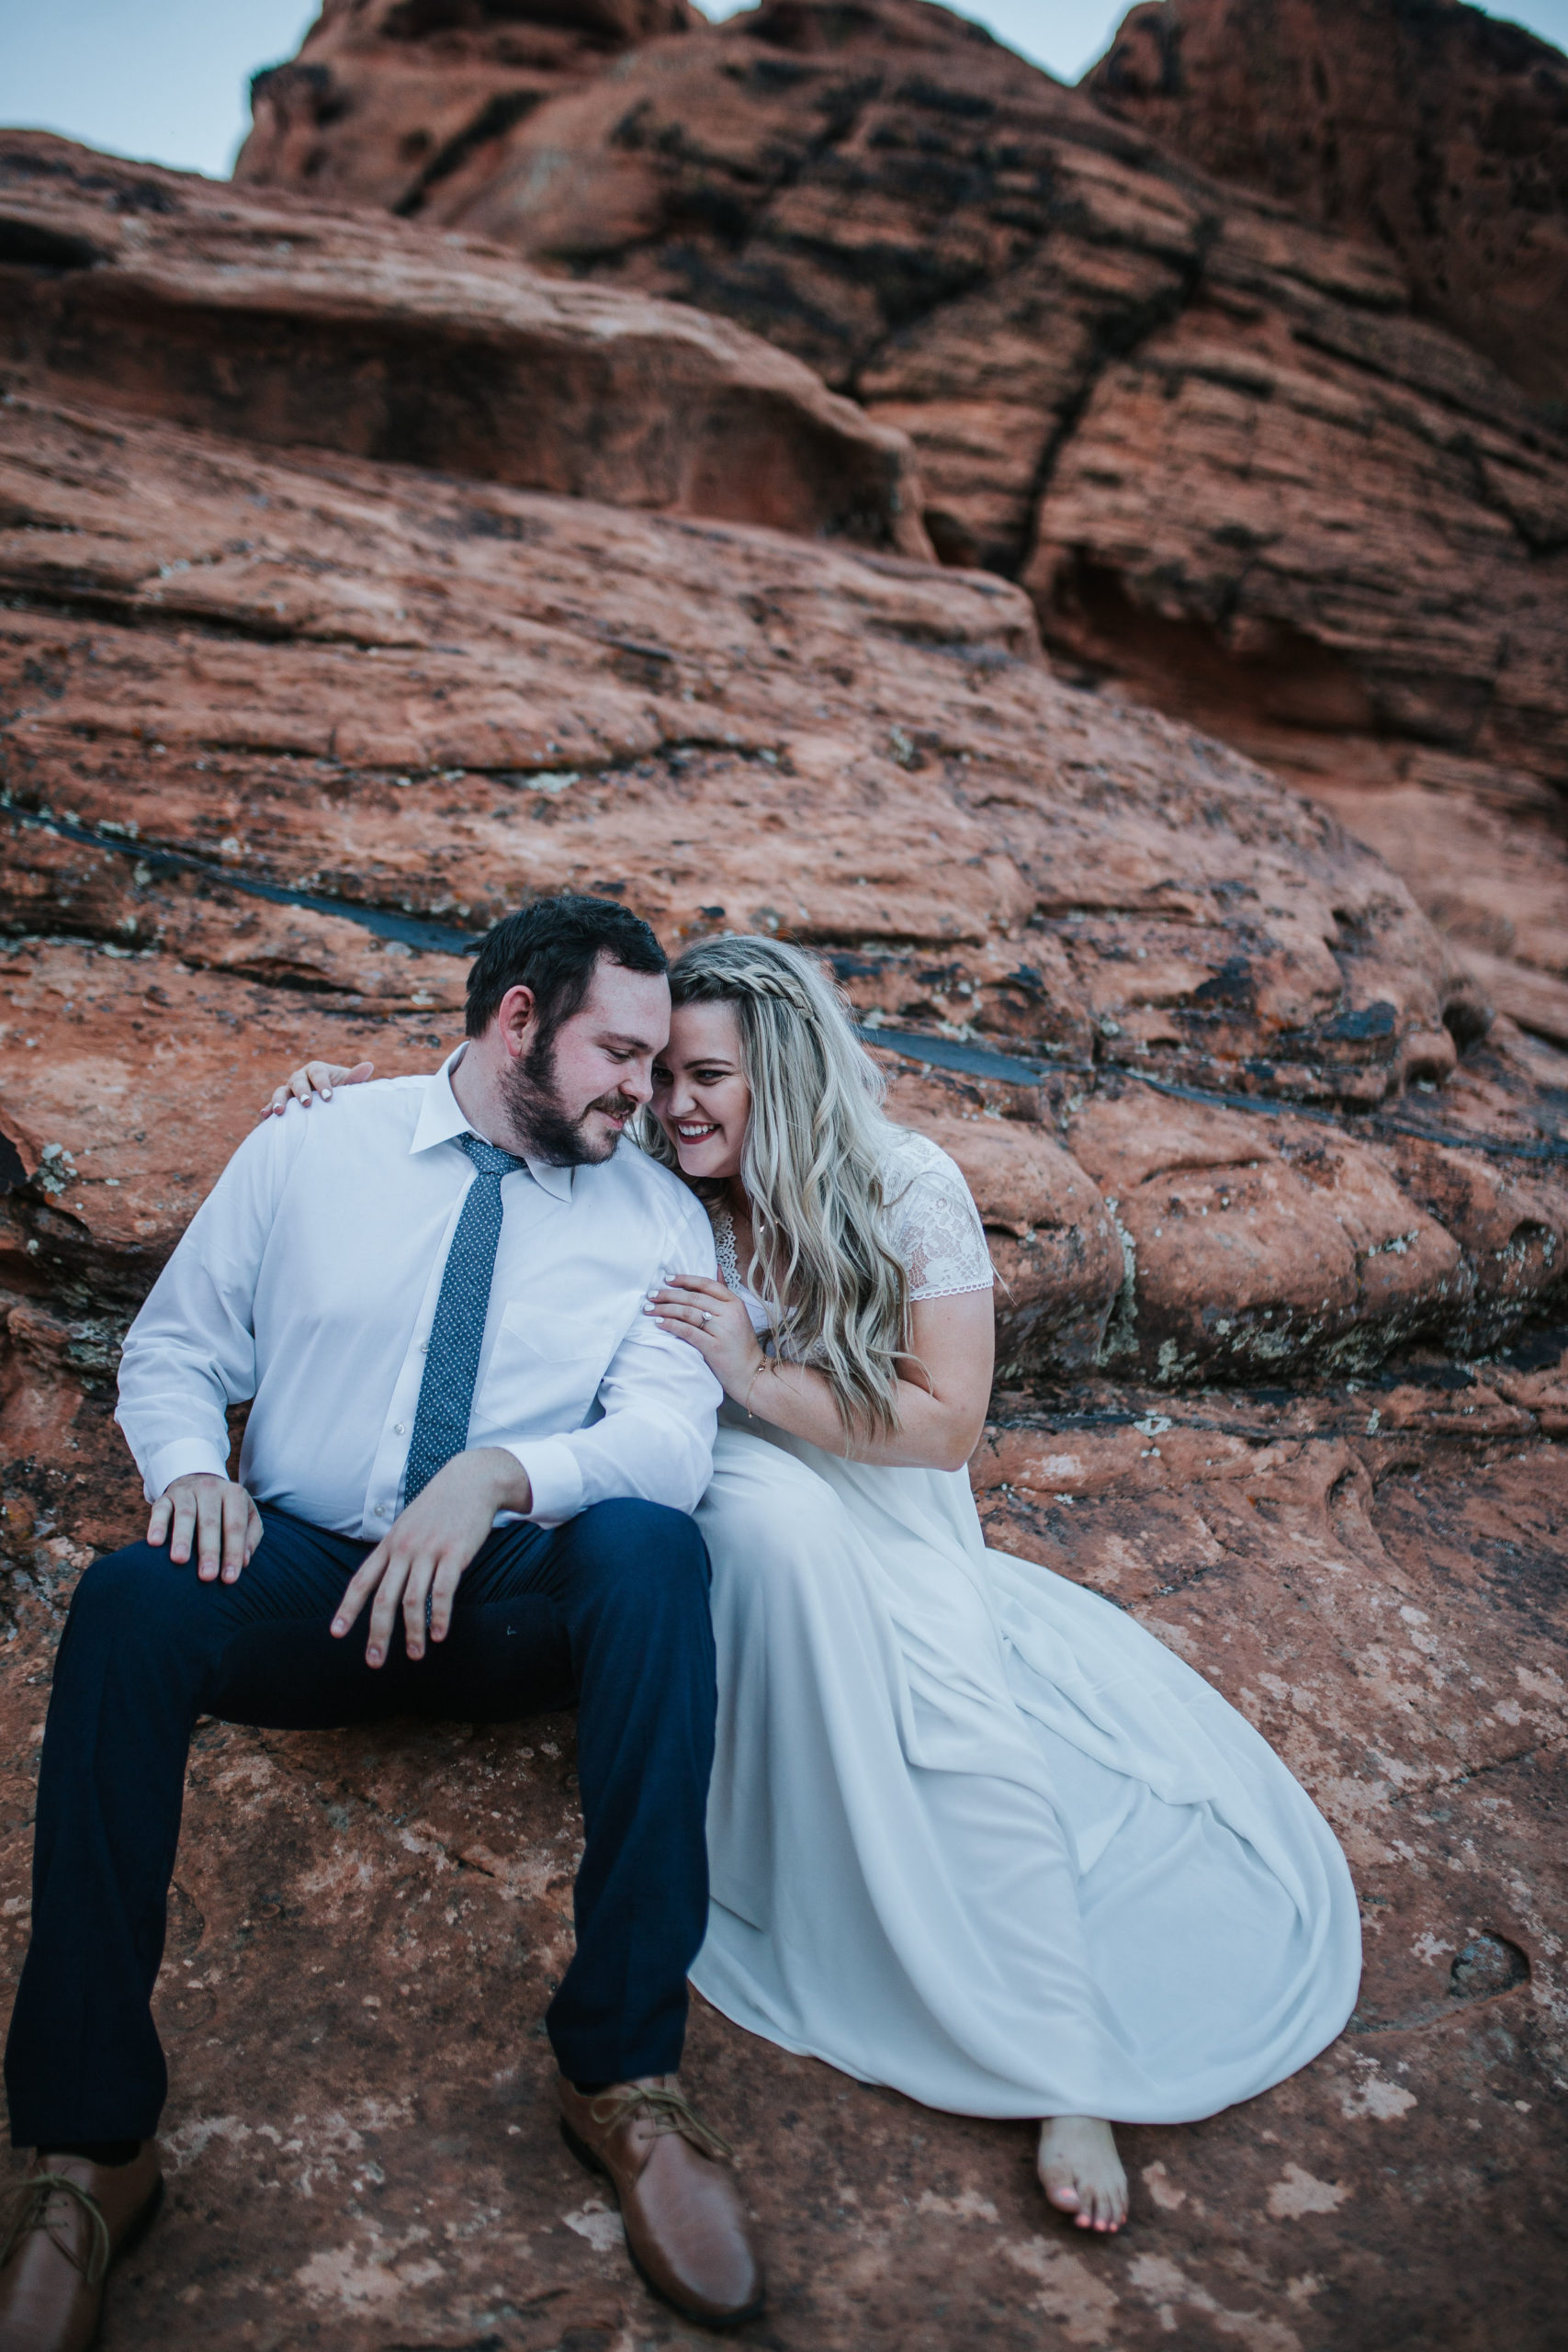 husband and wife on their wedding day sitting on some red rocks in the desert